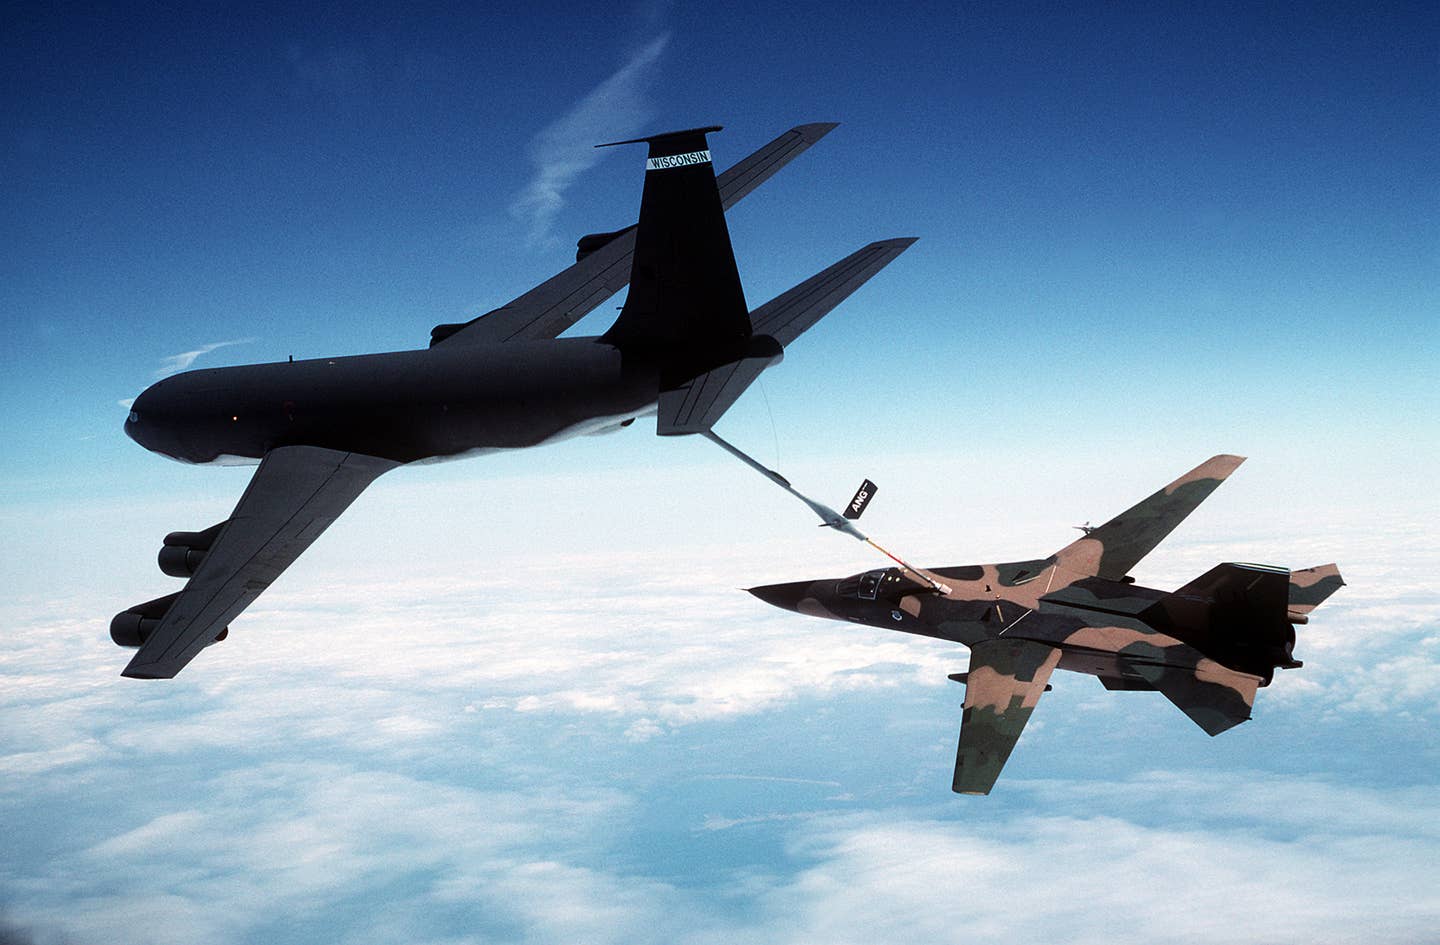 f-111f_aircraft_refueling_from_a_kc-135_stratotanker.jpg